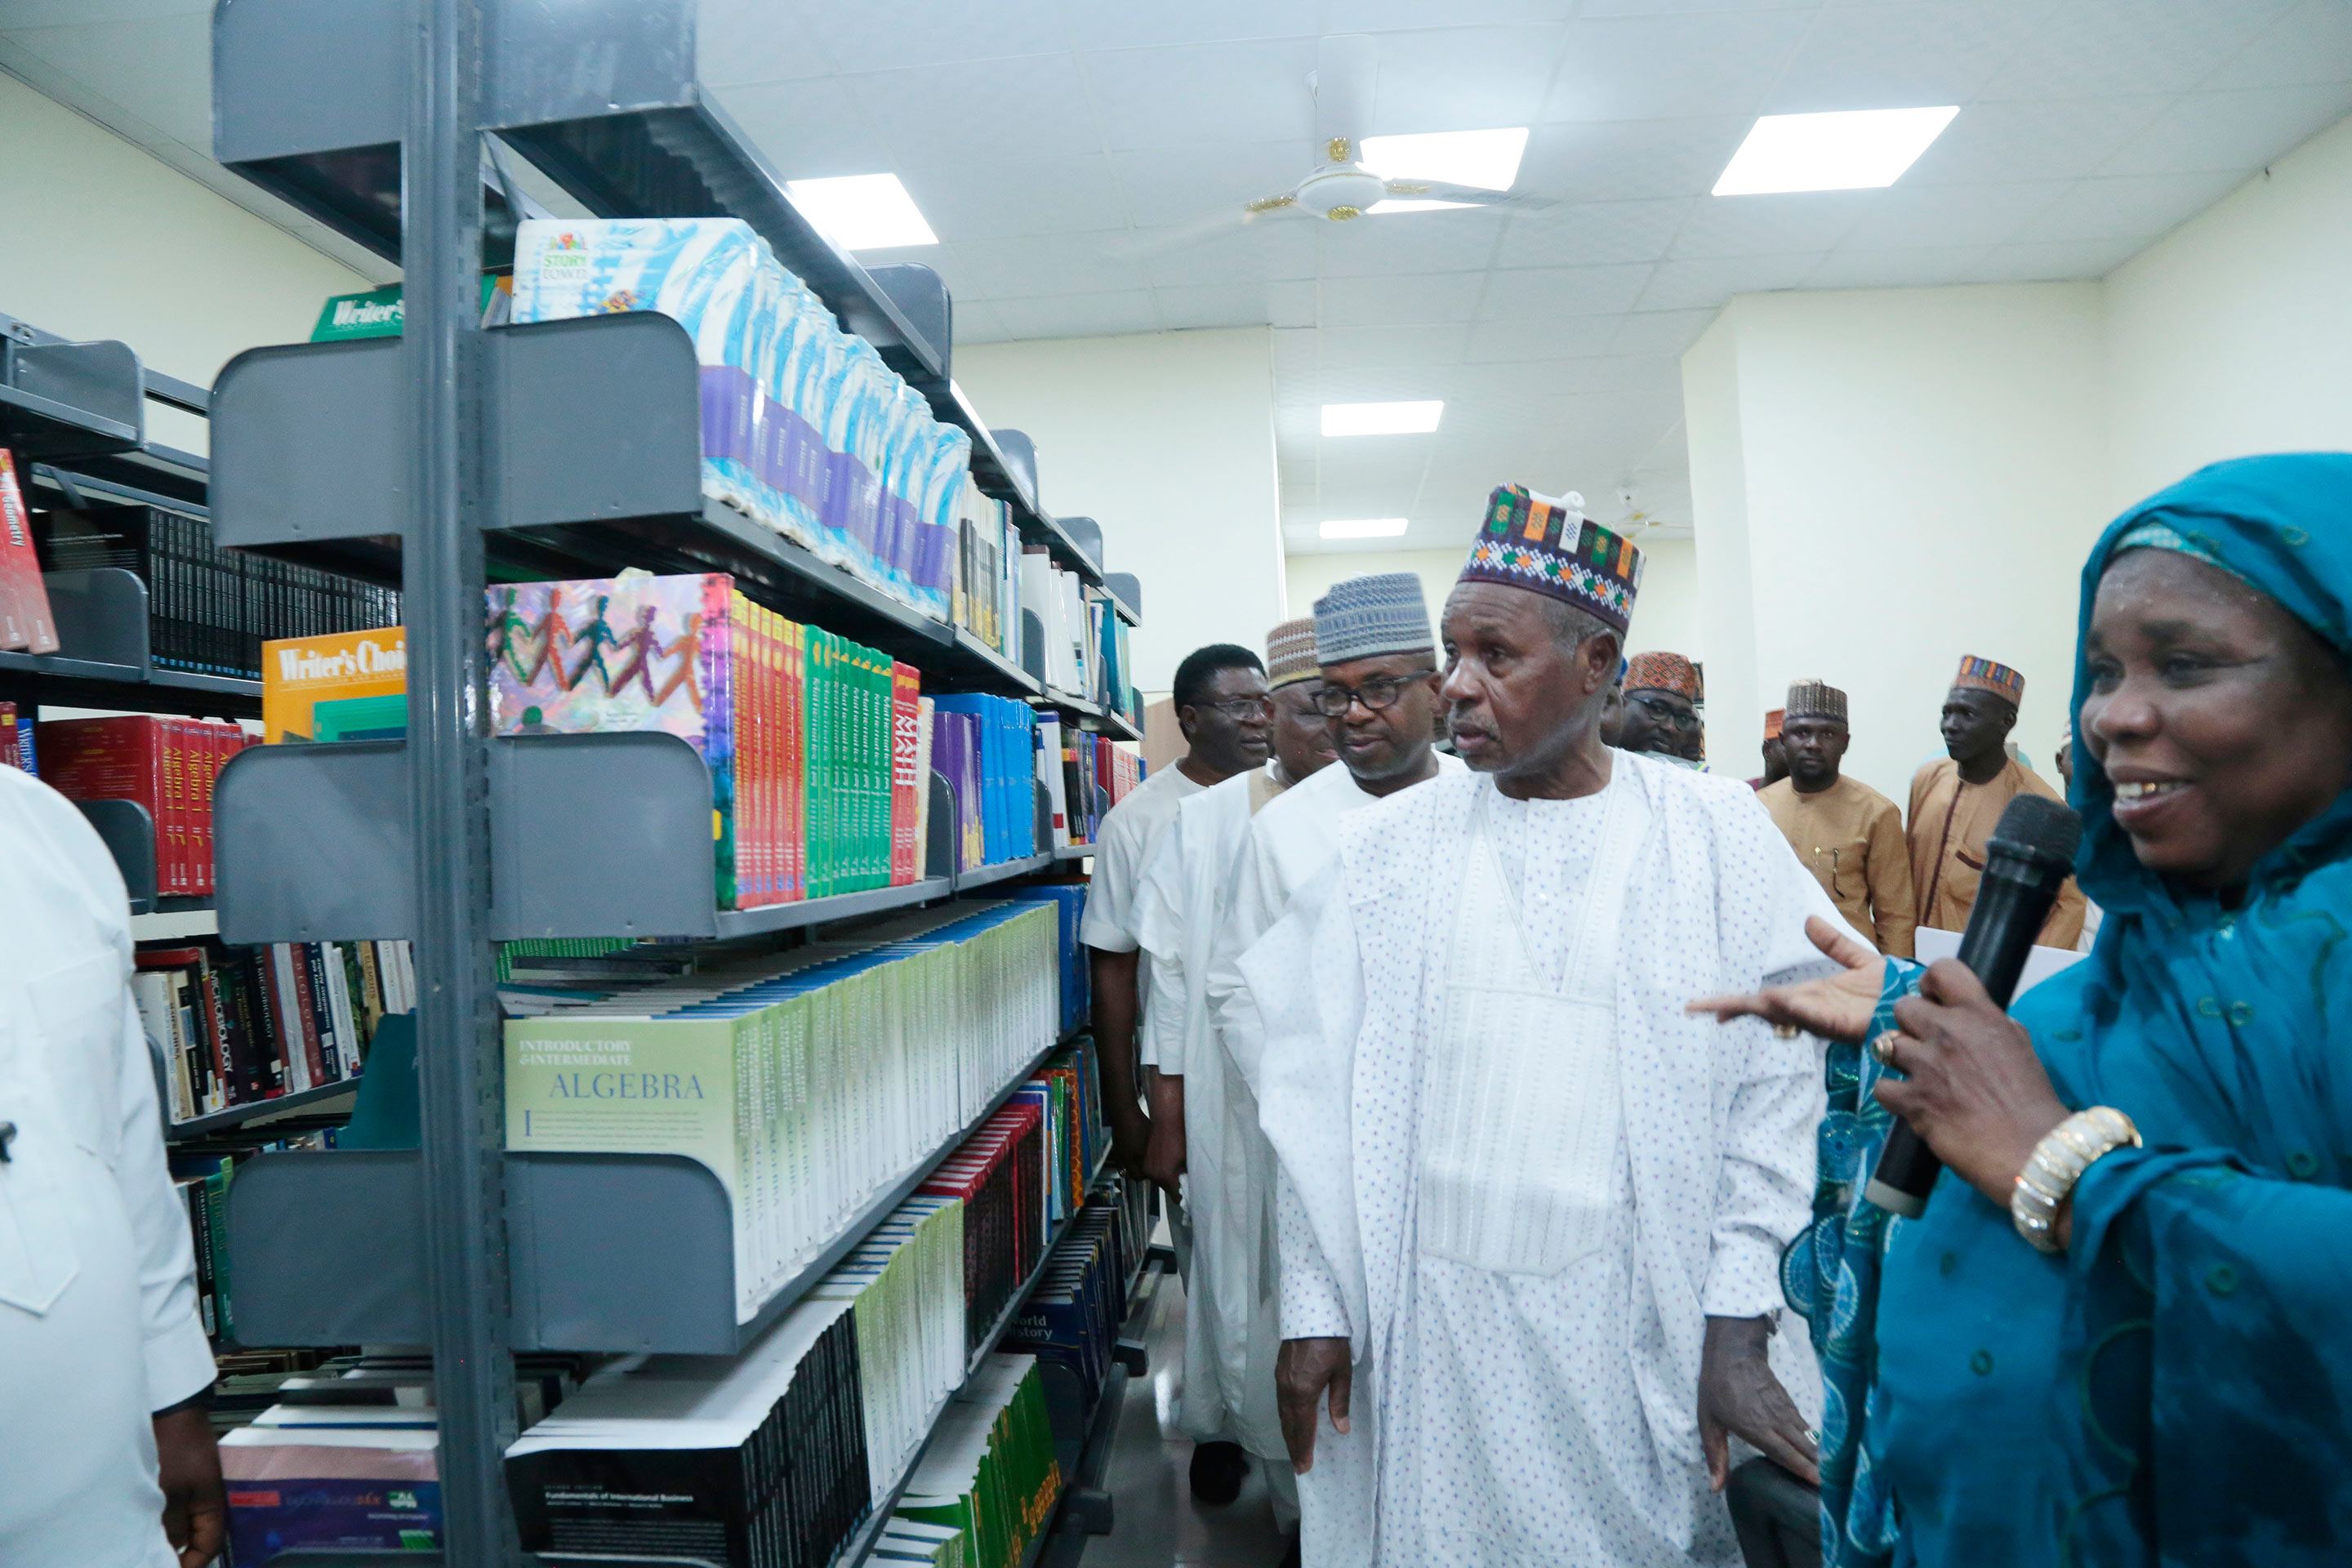 Sir Dr. Emeka Offor Inspects Waziri Alhassan Public Library in Daura